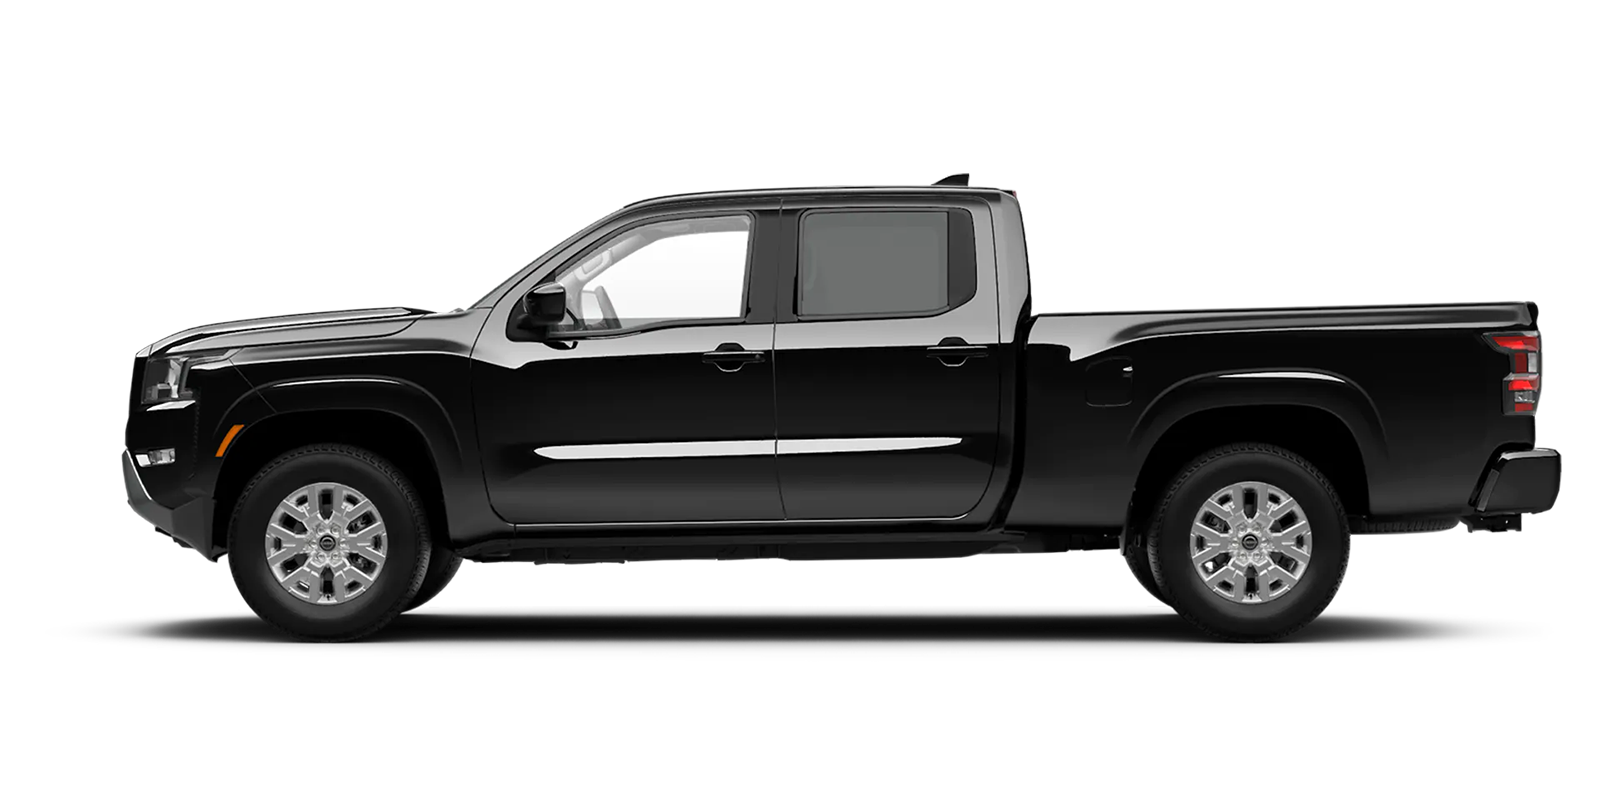 2022 Frontier Crew Cab Long Bed SV 4x4 in Super Black | Alan Webb Nissan in Vancouver WA